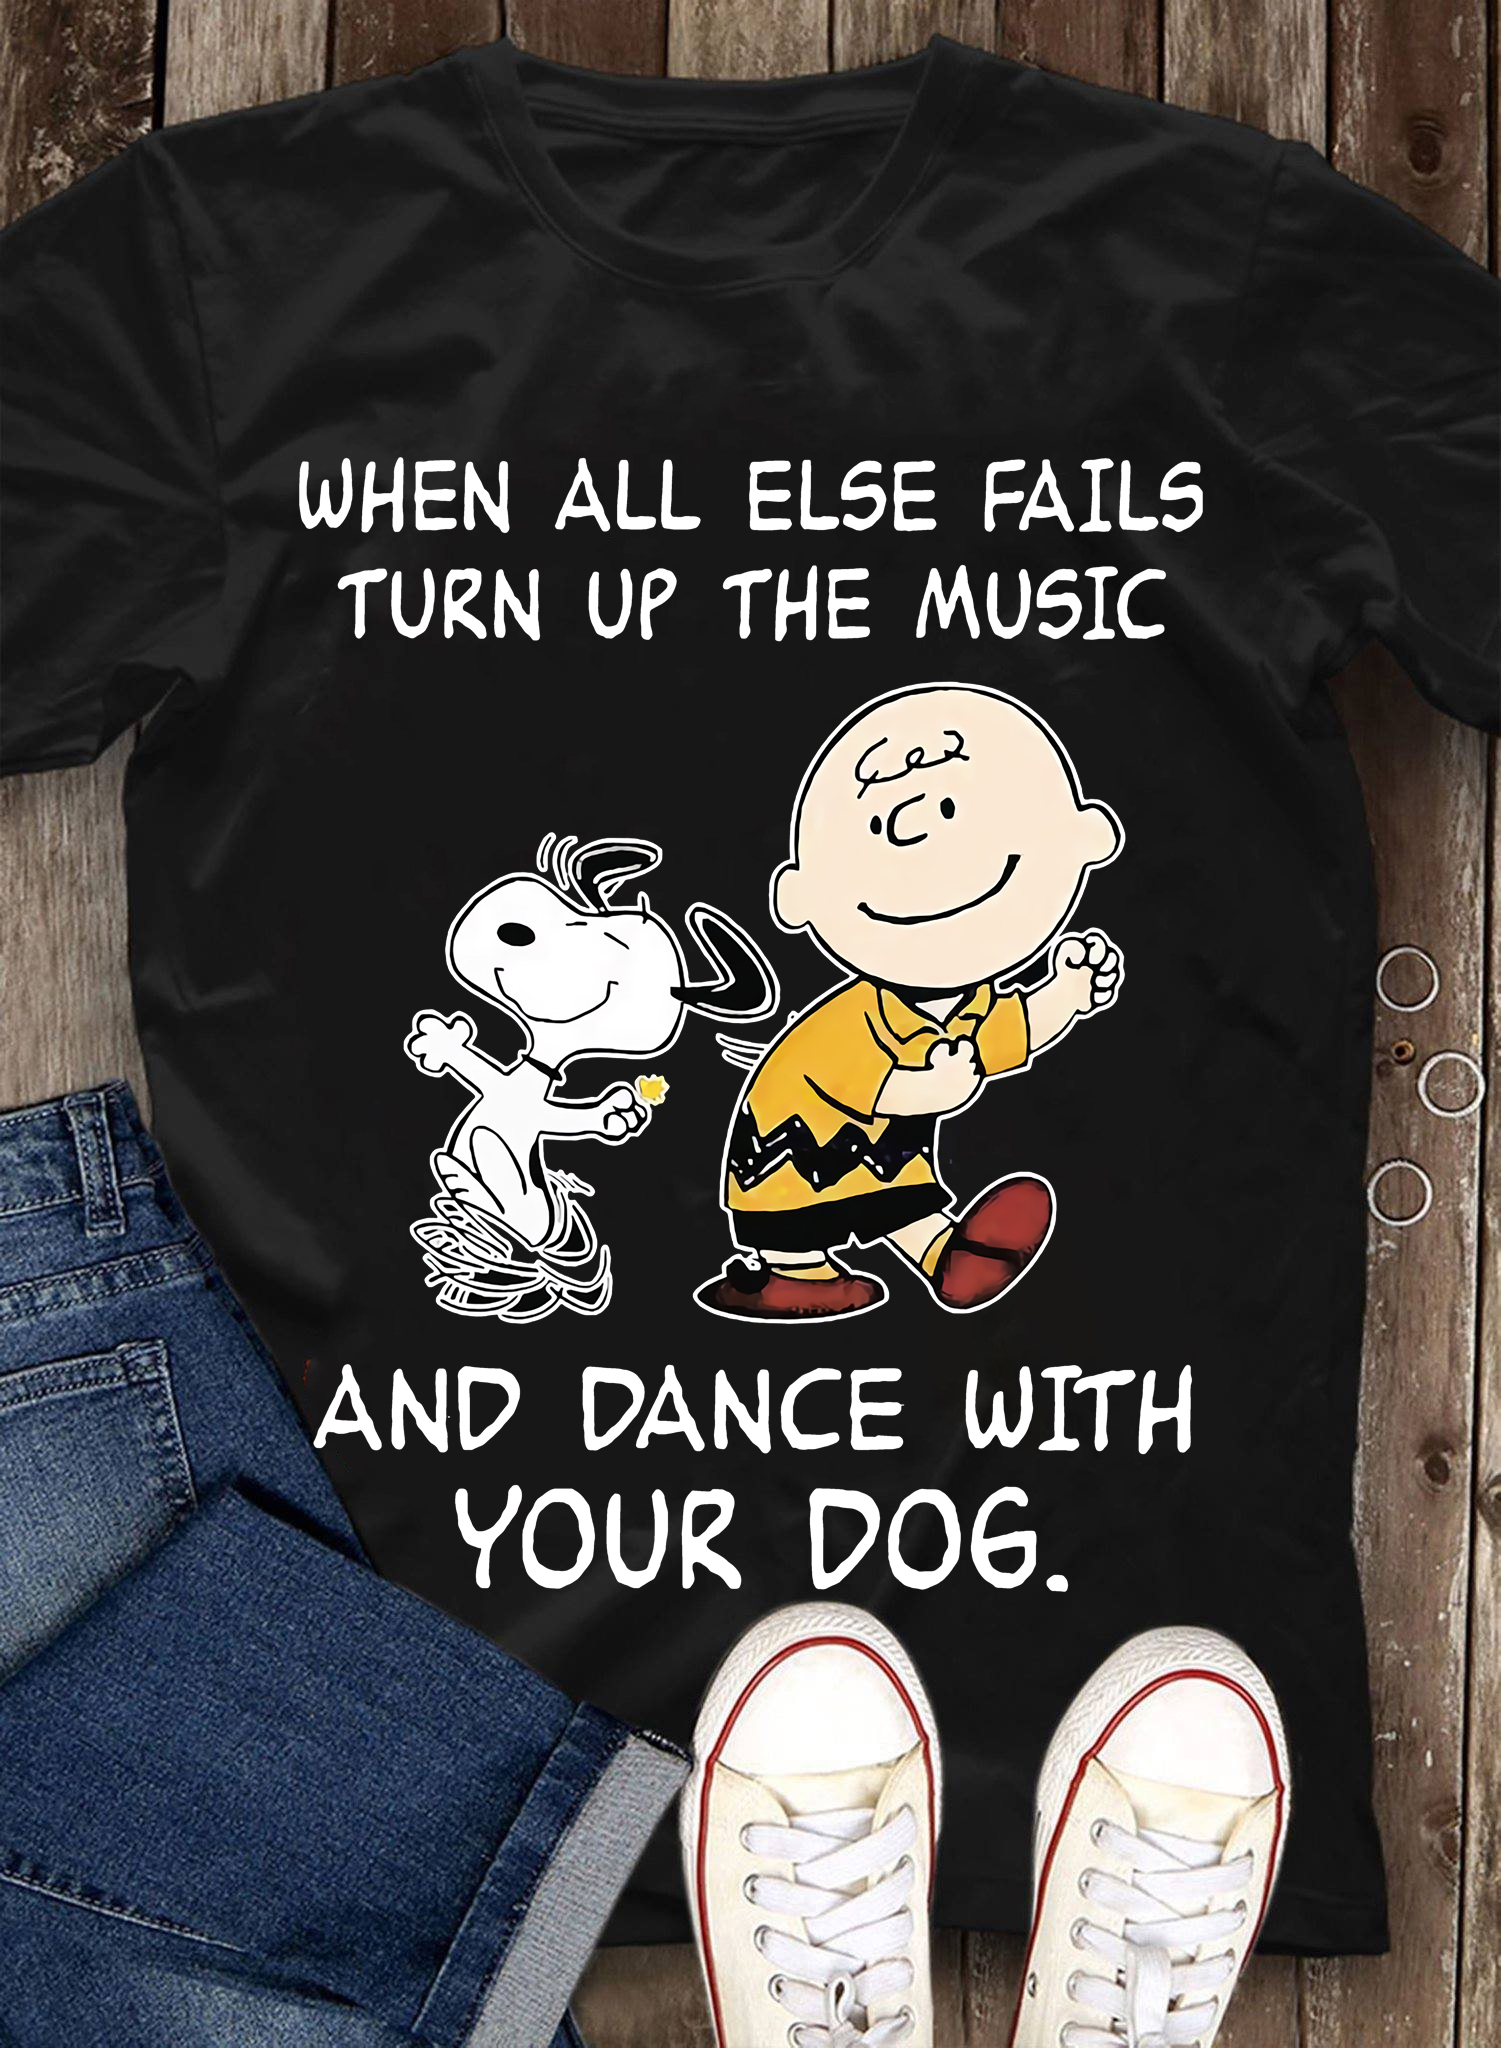 When all else fails turn up the music and dance with your dog